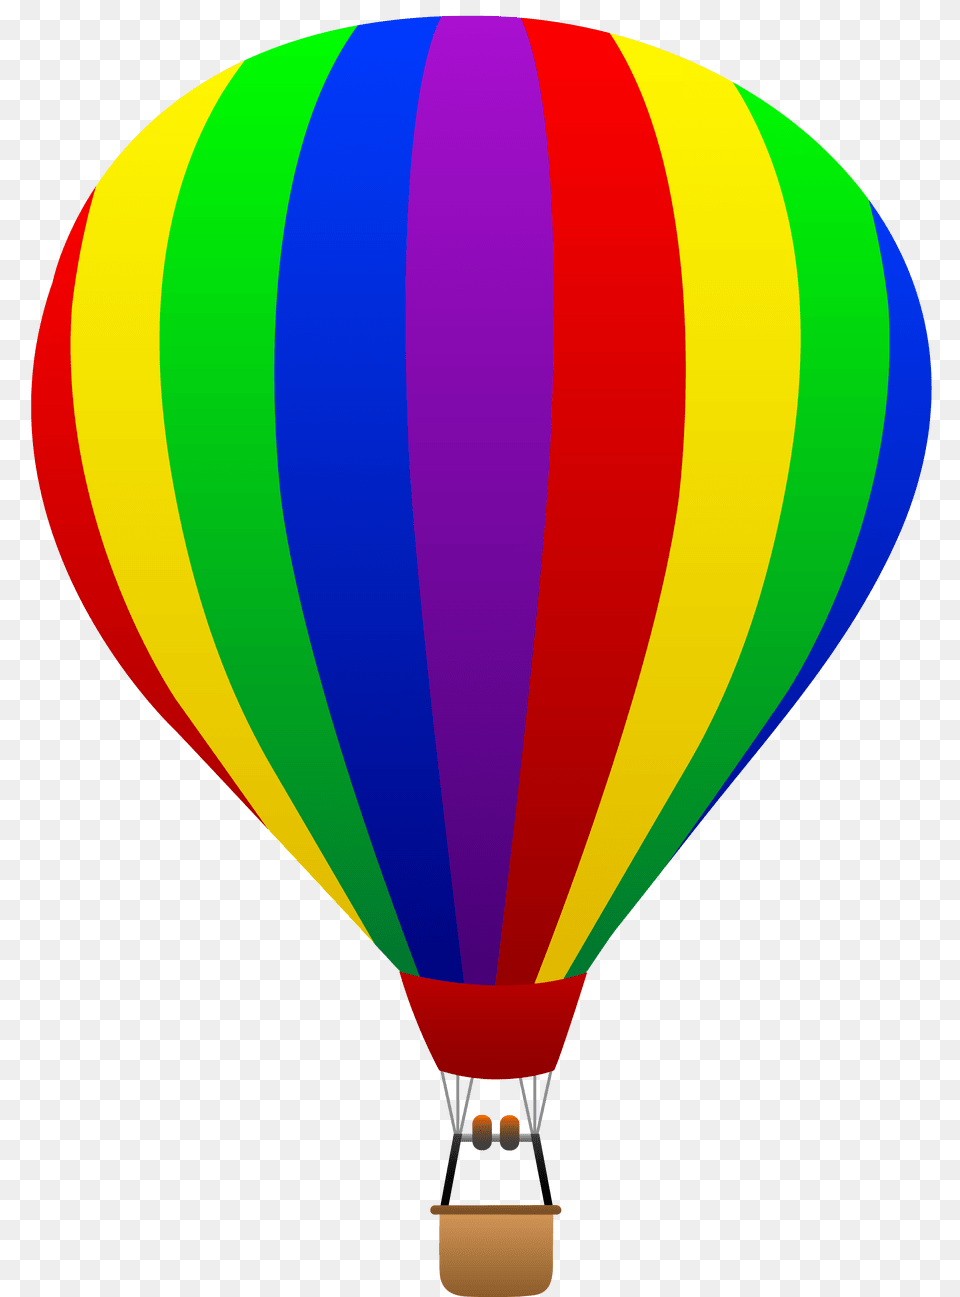 Clip Art Of A Fun Rainbow Striped Hot Air Balloon Sweet Clip, Aircraft, Hot Air Balloon, Transportation, Vehicle Png Image